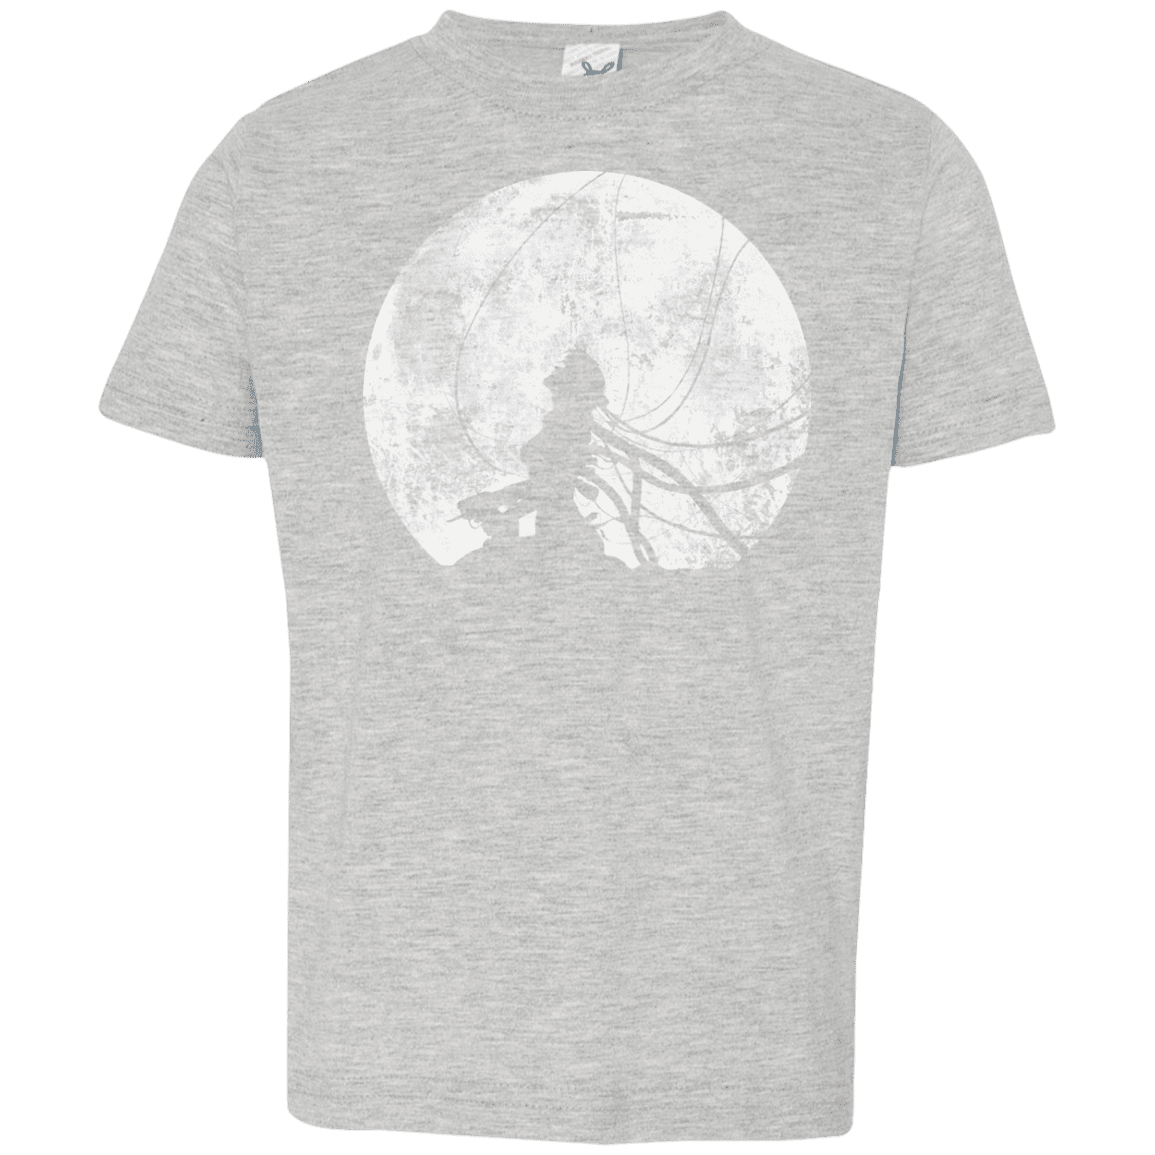 T-Shirts Heather Grey / 2T Shell of a Ghost Toddler Premium T-Shirt